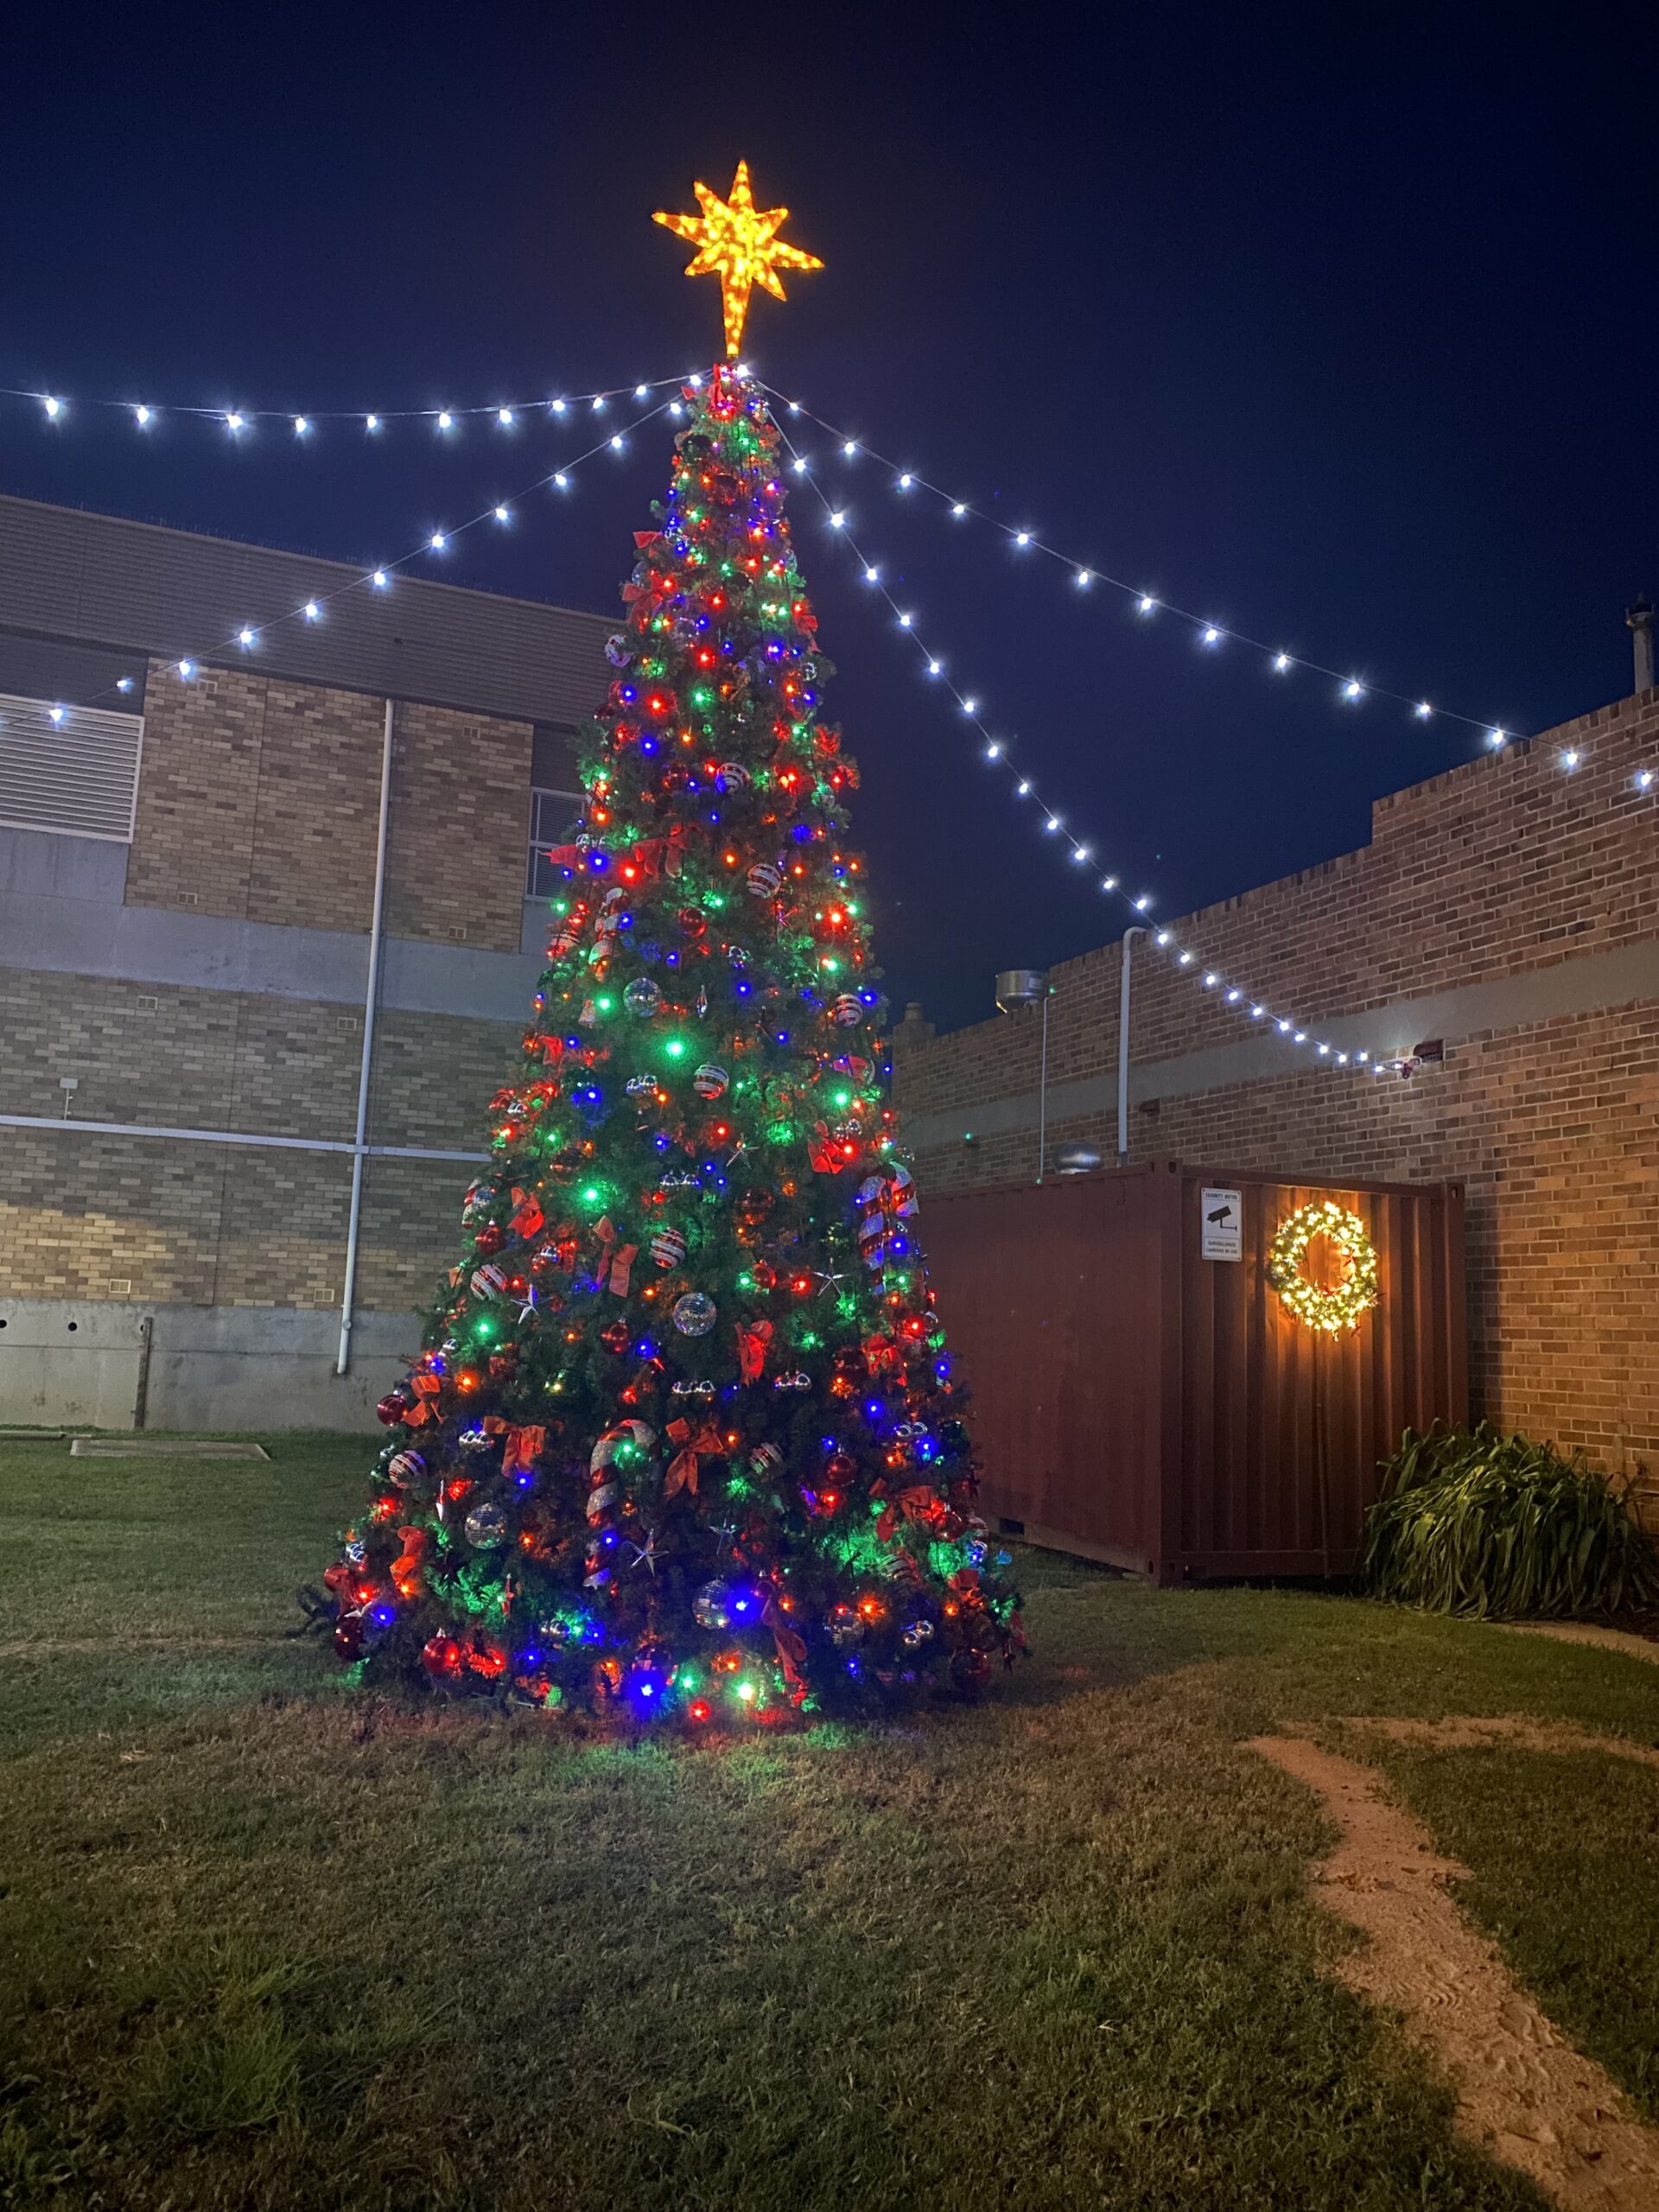 Christmas tree sparkles with new decorations | PHOTOS